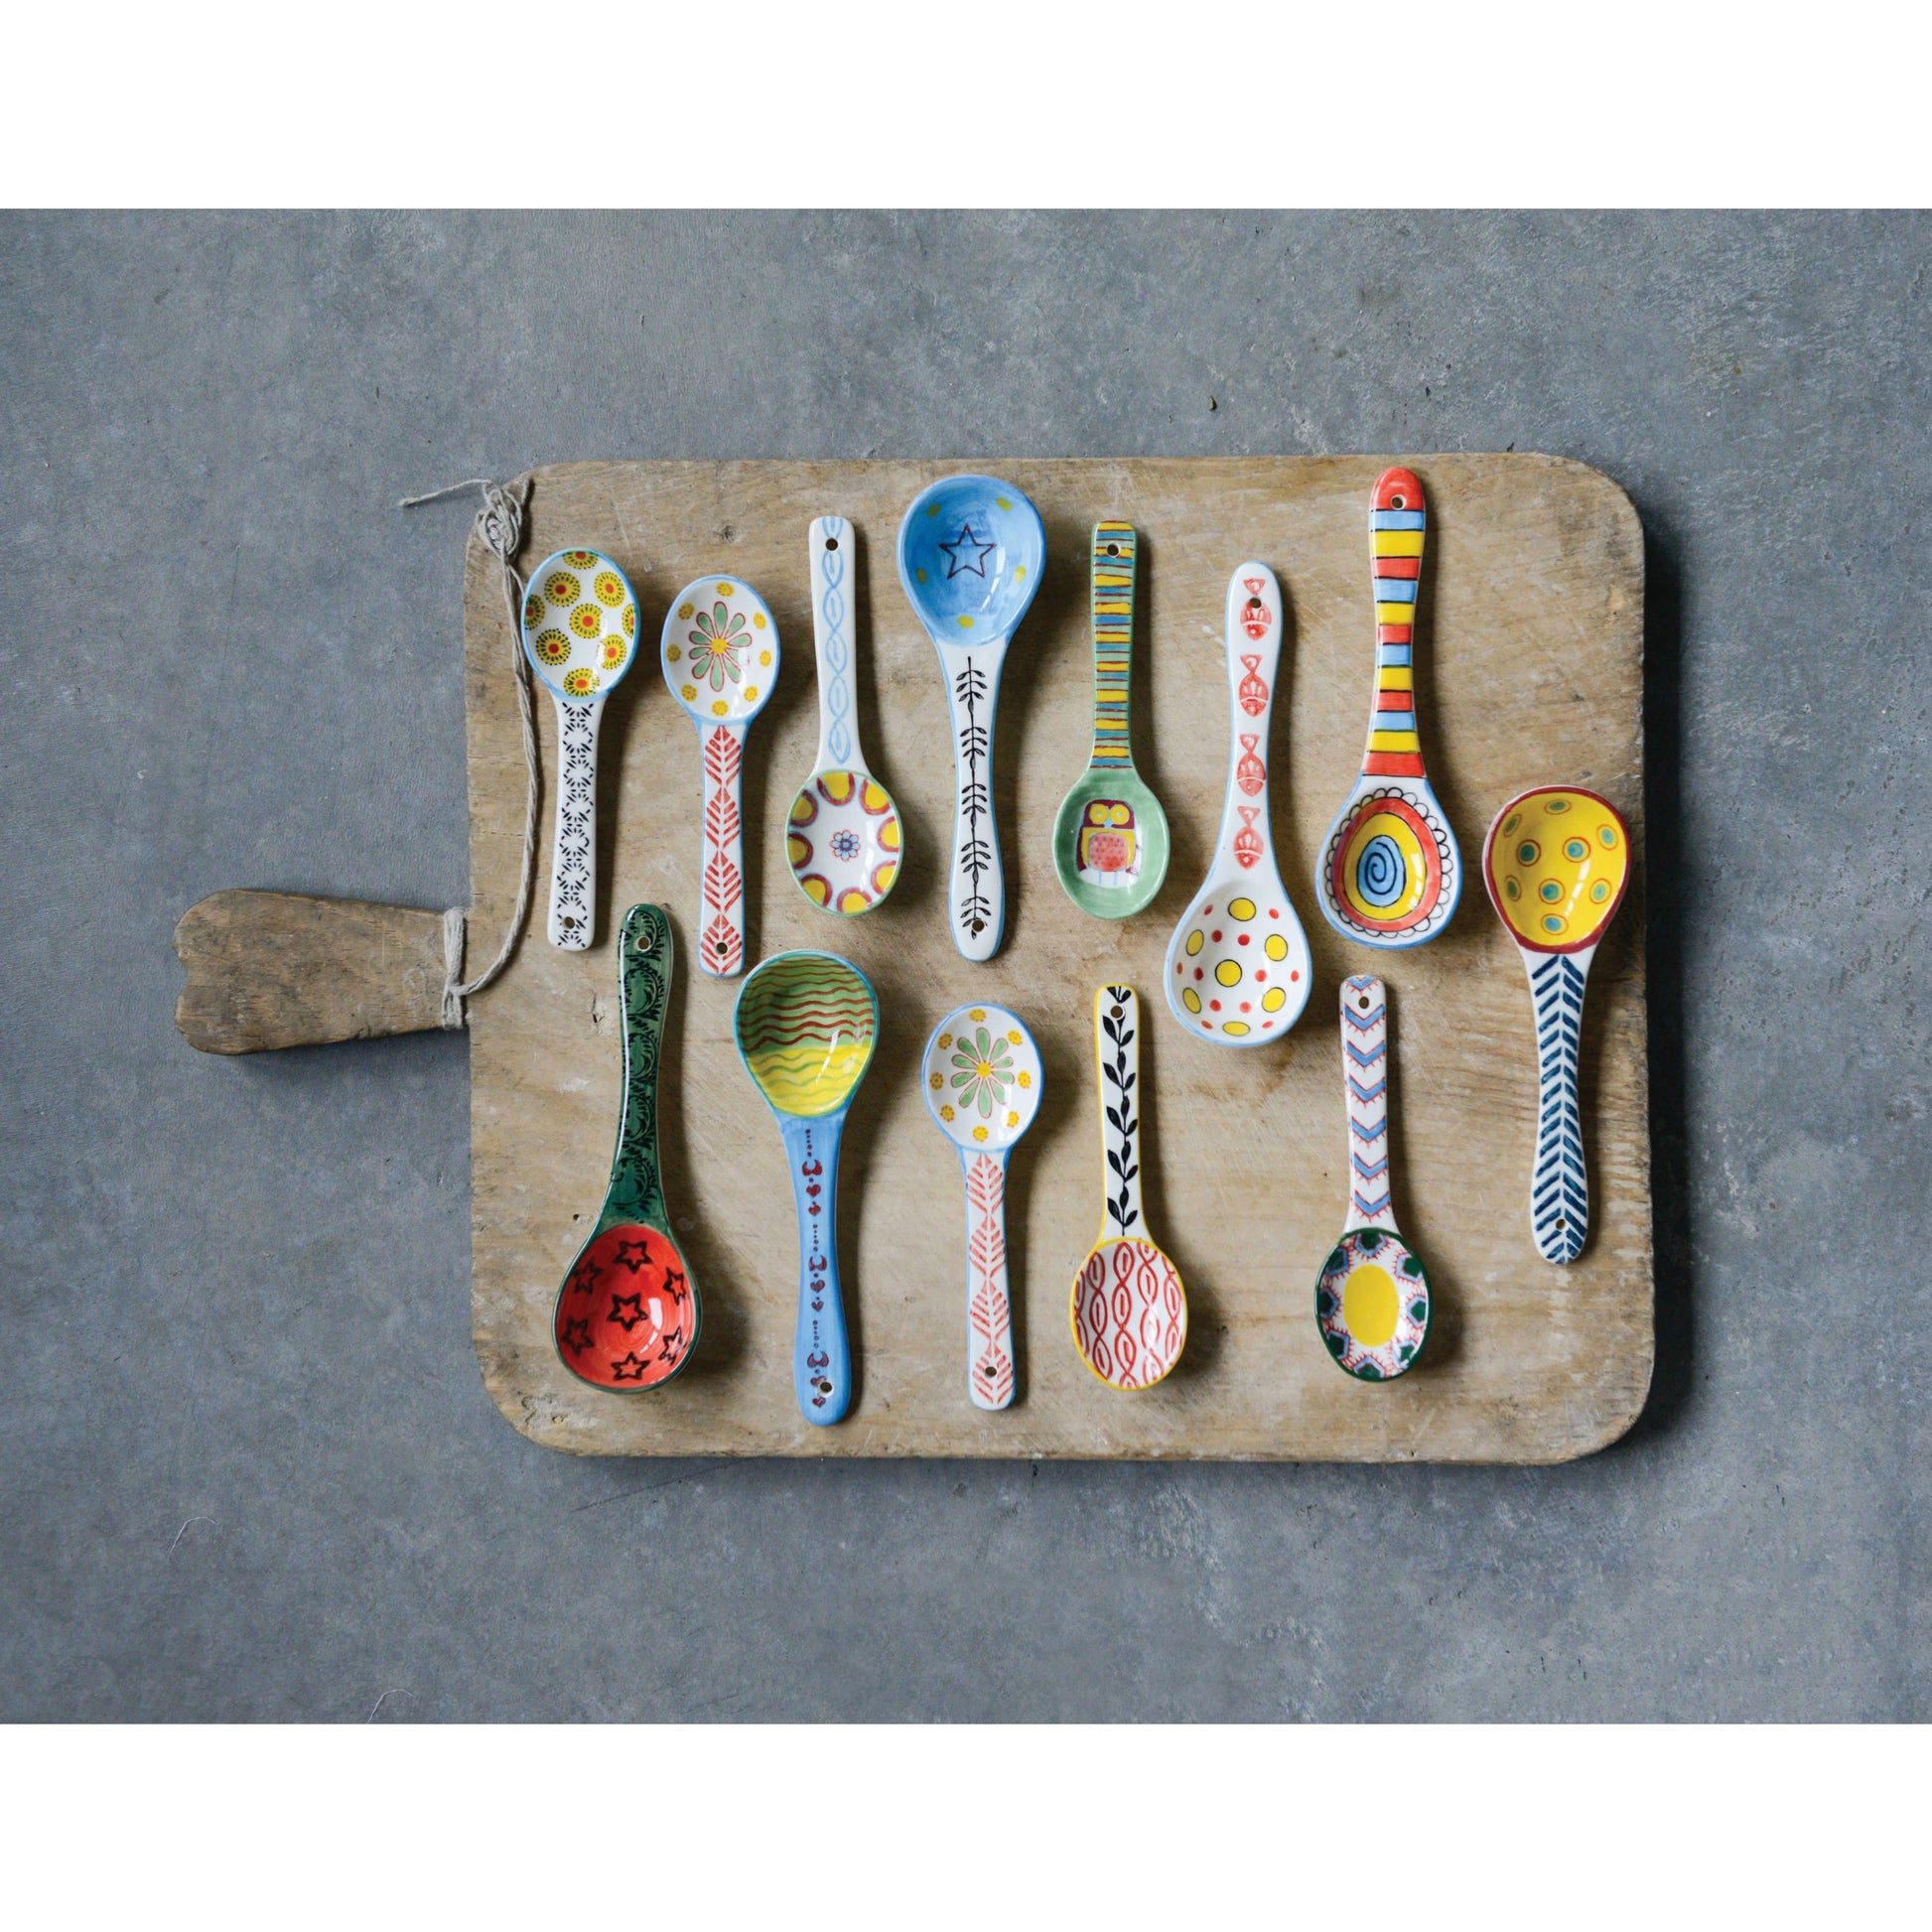 colorful spoons arranged on a wooden board.